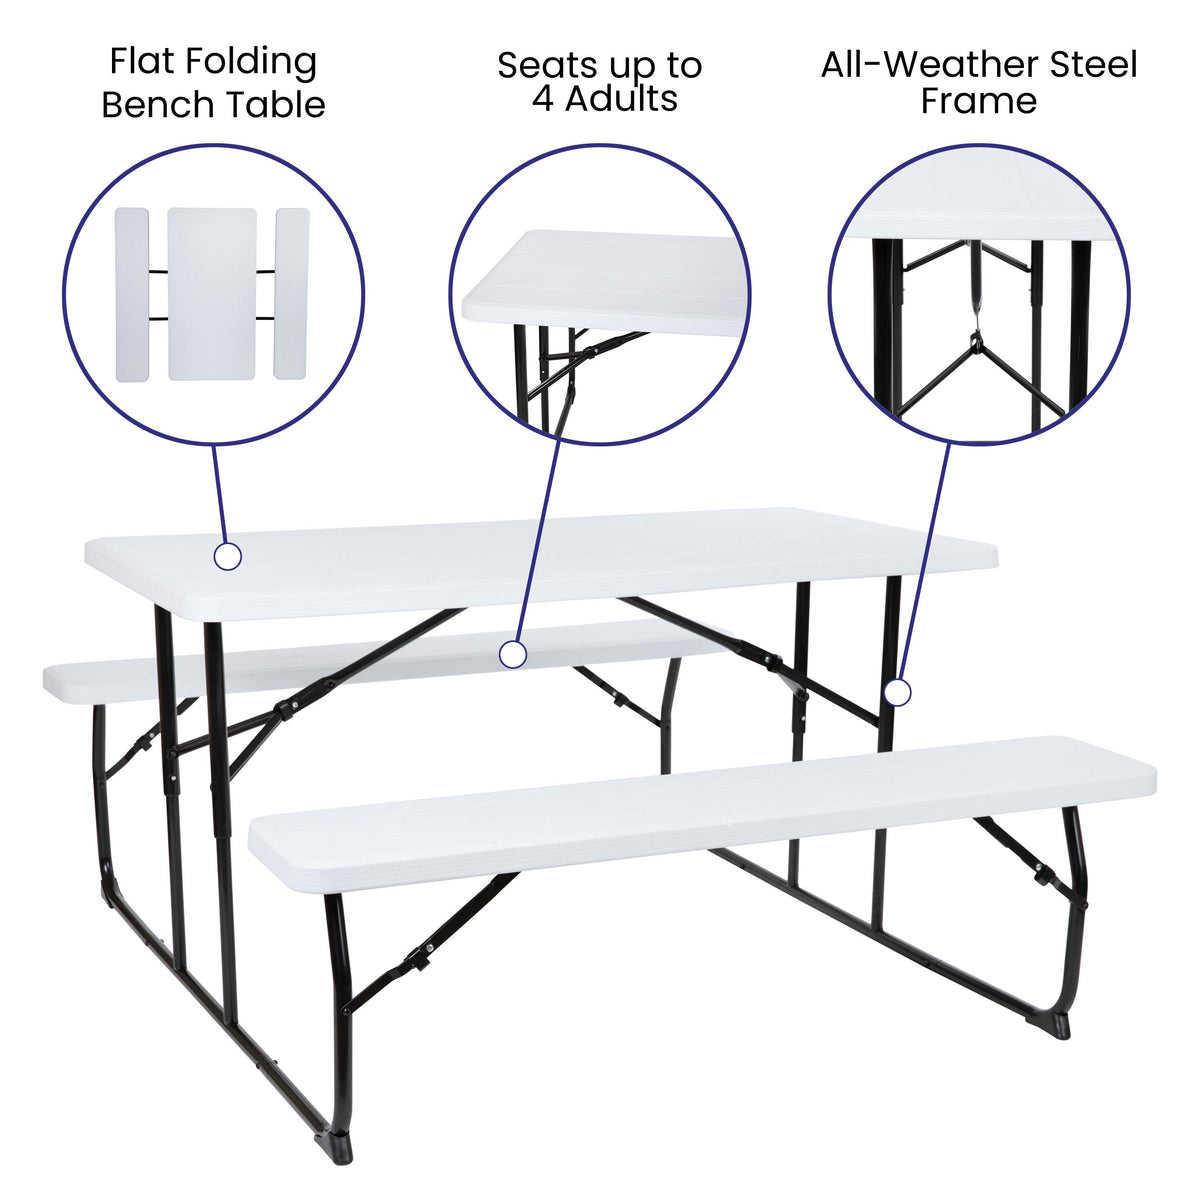 White |#| All-In-One Folding Picnic Table and Bench Set - Adult Size, White Wood Grain